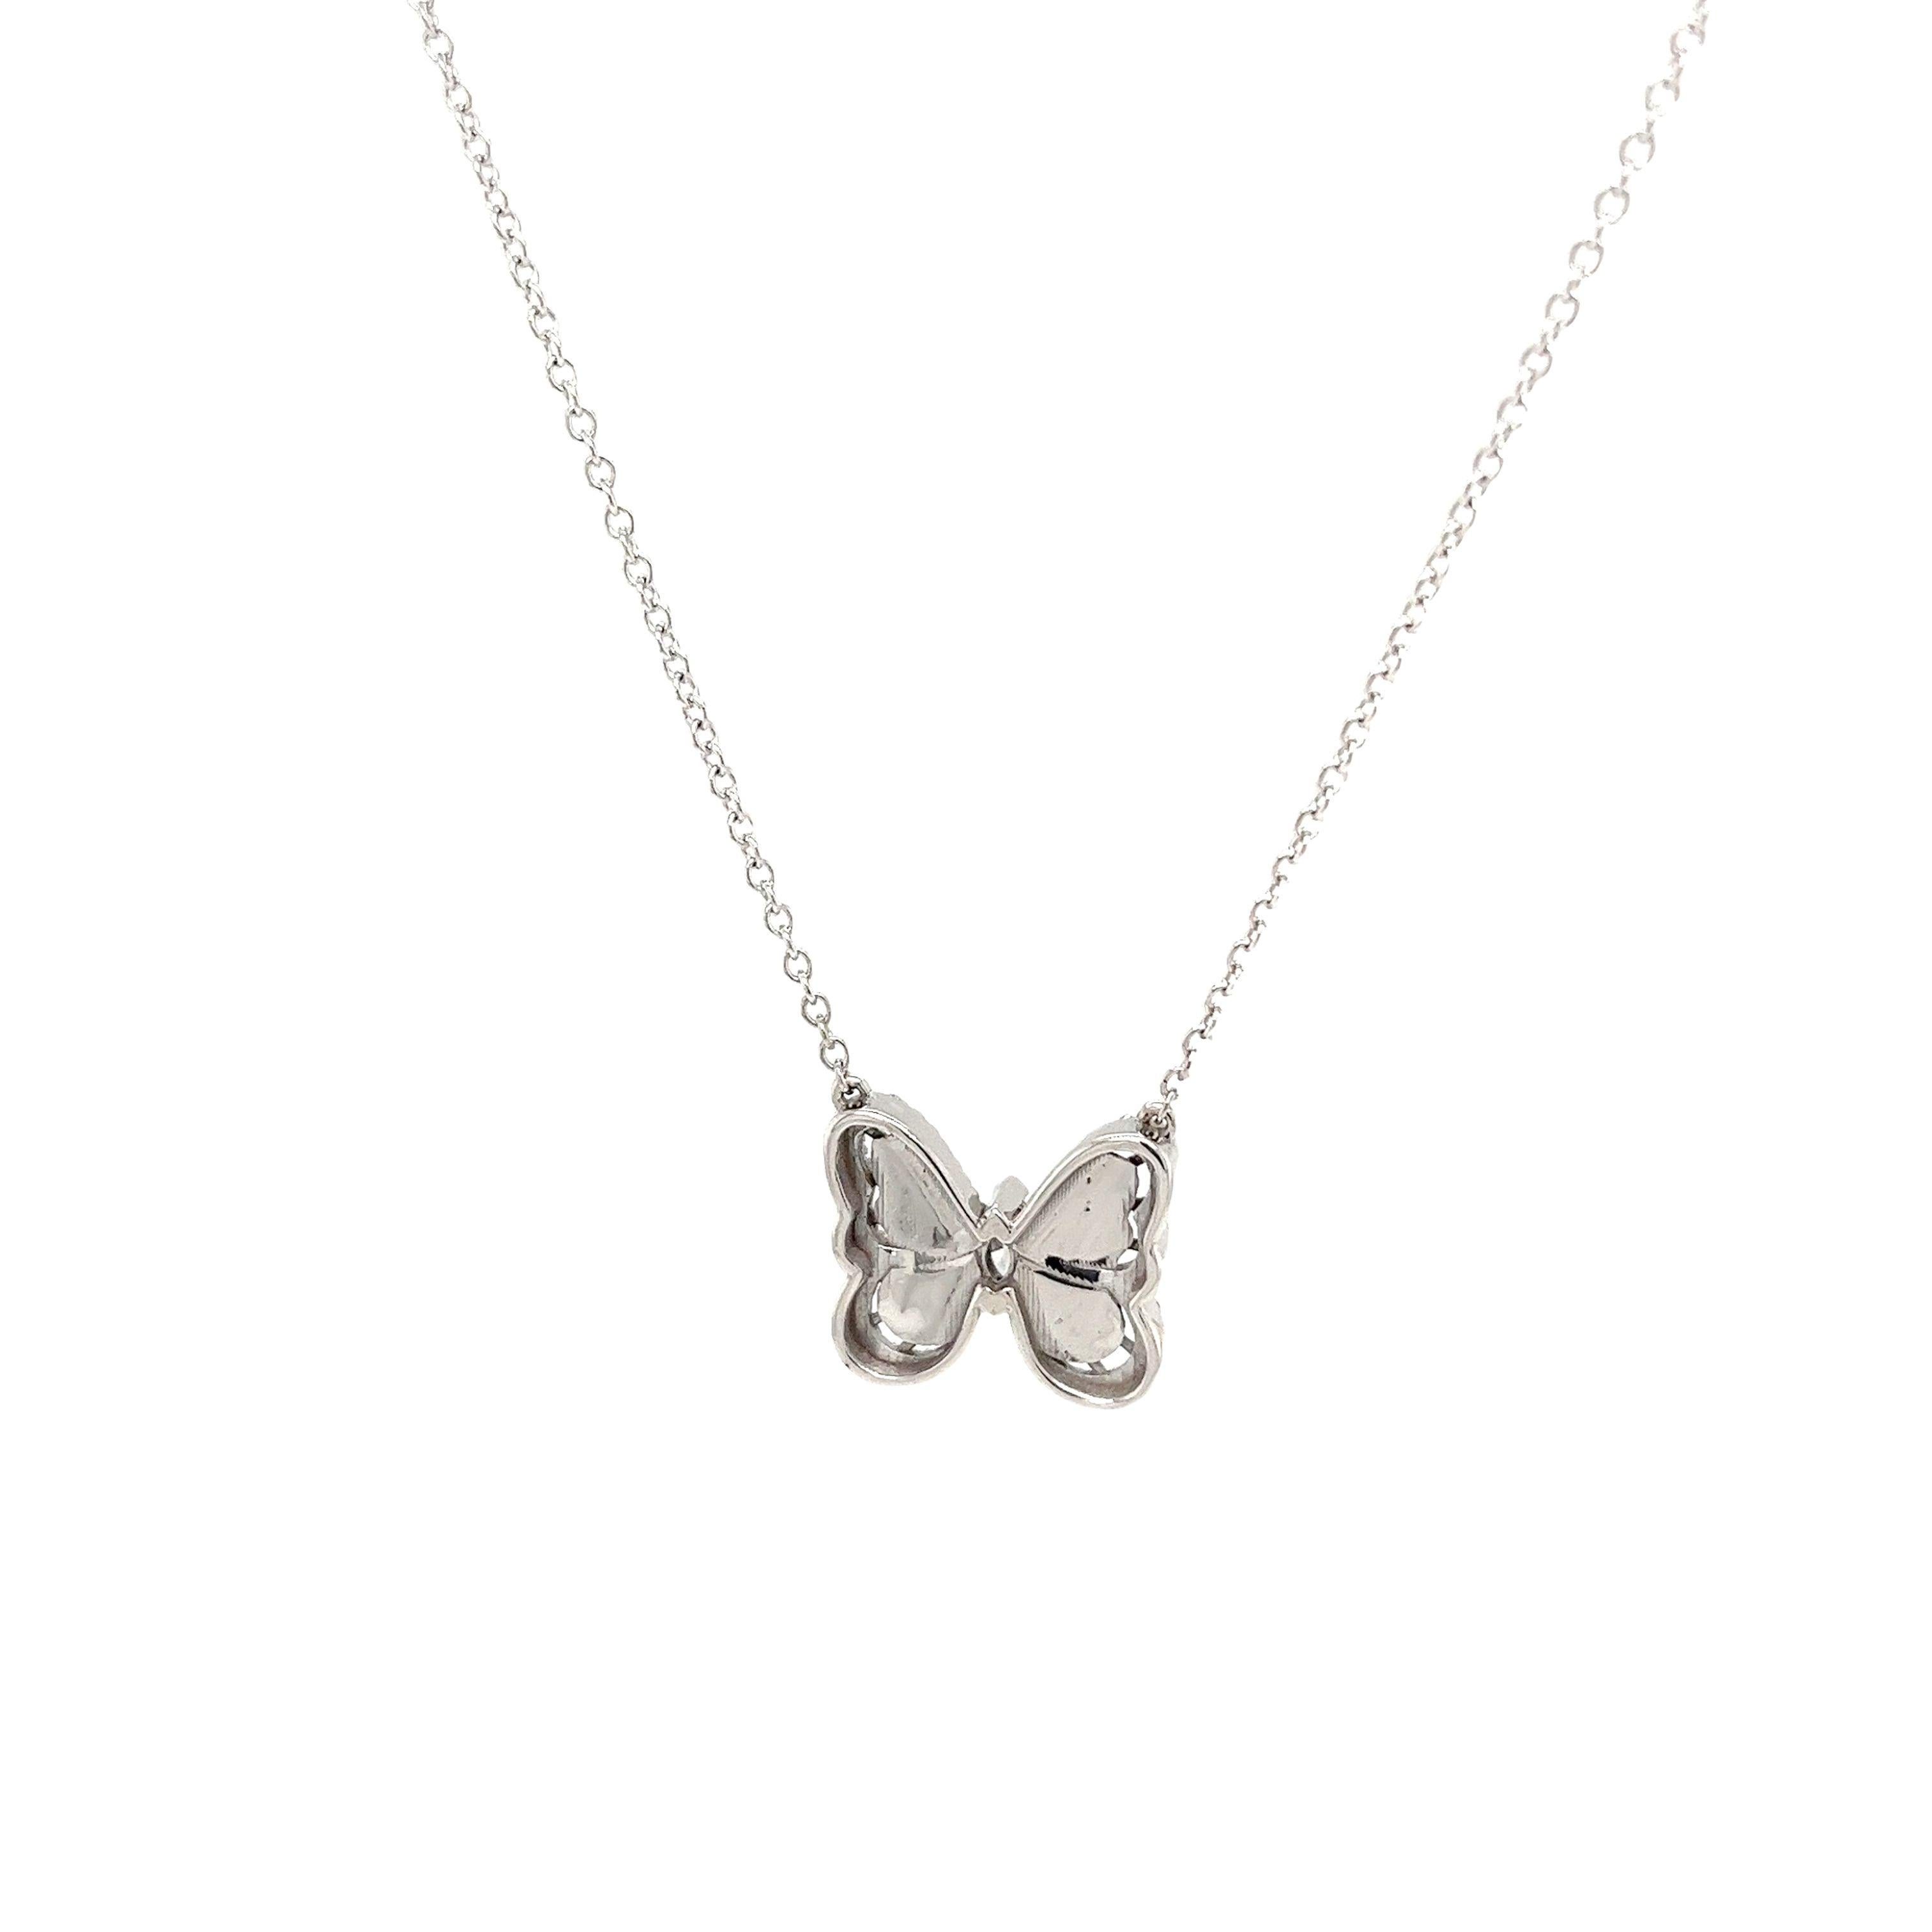 This gorgeous diamond butterfly pendant is set with 1 marquise-shaped diamond and 26 round diamonds with a total diamond weight of 0.78 carats in 18ct white gold. 
The pendant is suspended from an 18-white gold chain 
that measures 18 inches